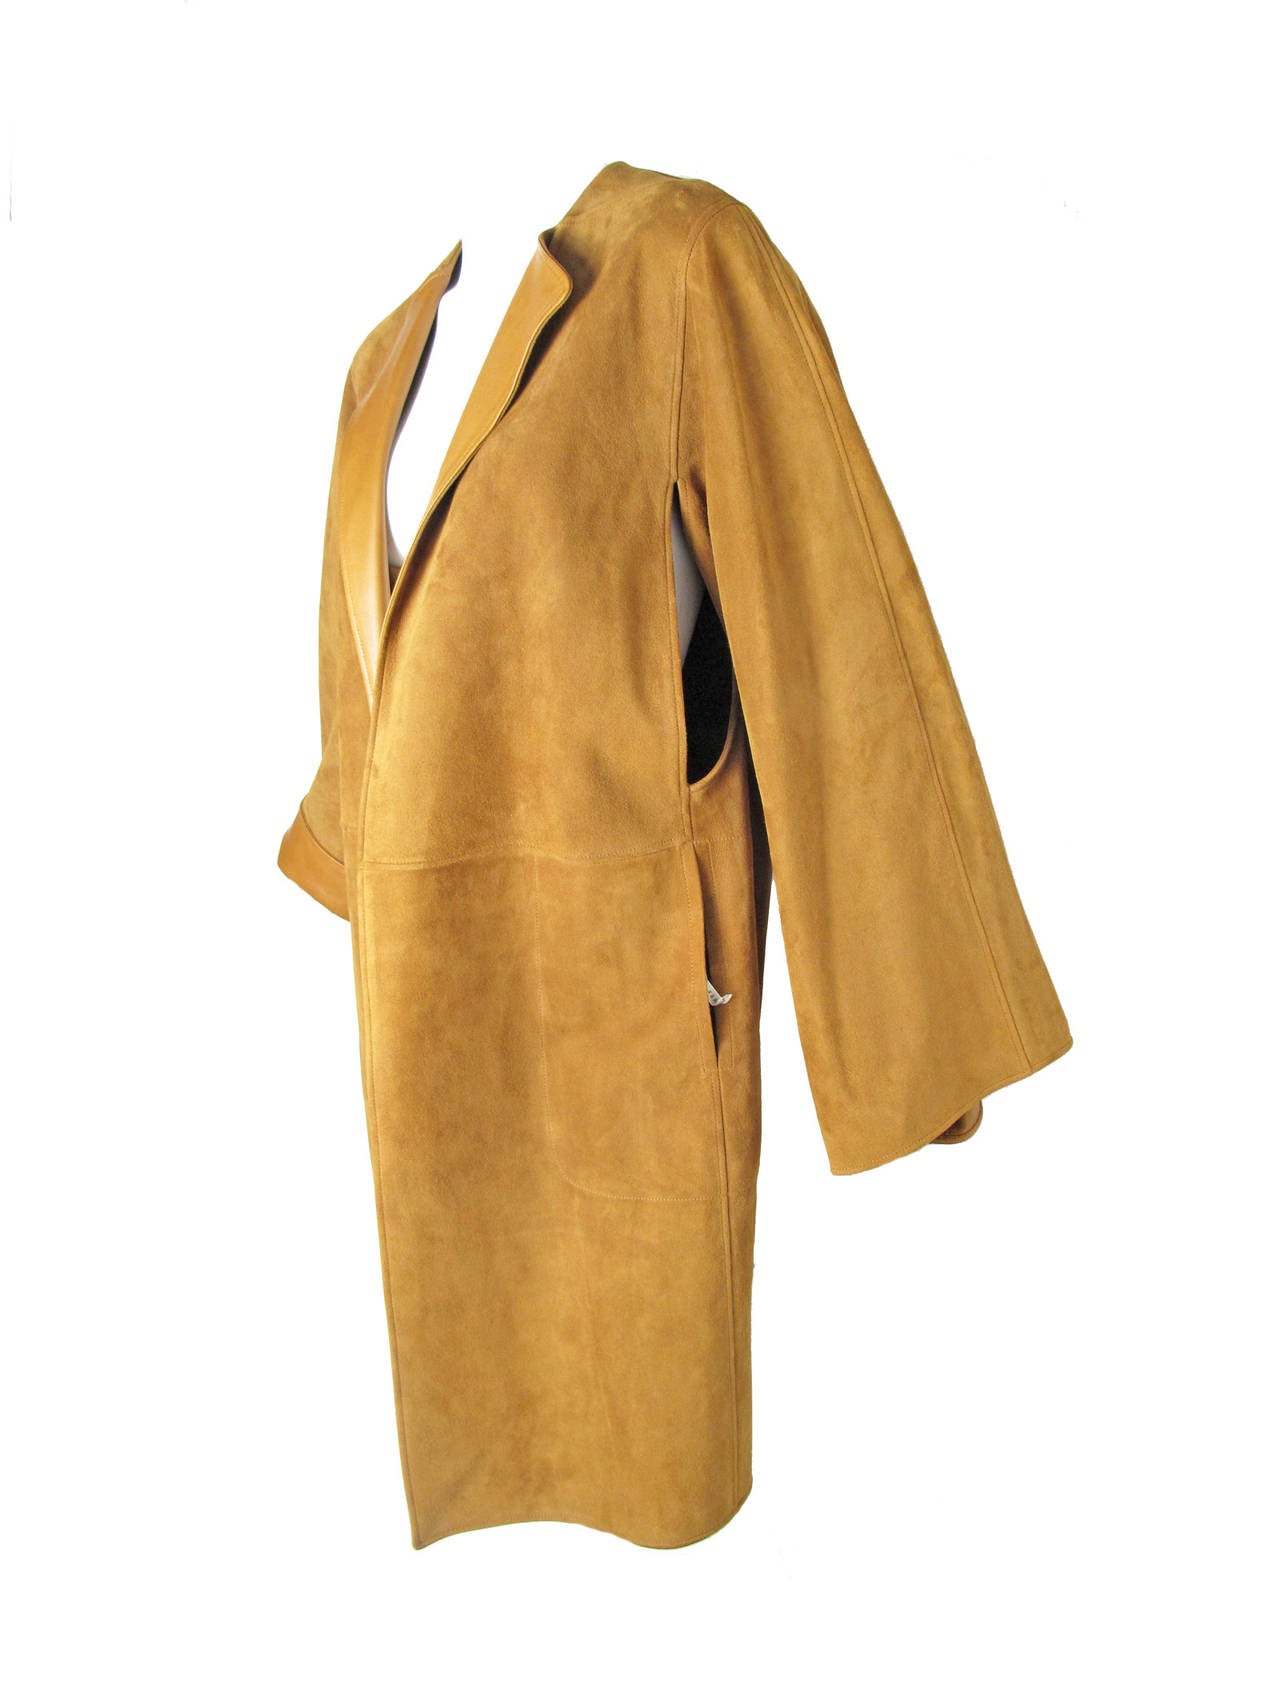 Rare Hermes camel lambskin suede coat.  Two side pockets, cuffs can be rolled up to show leather underneath.  Armholes are open and attach to drape across back. Not lined, just the beautiful leather underside shown.   Condition: Very good, shows